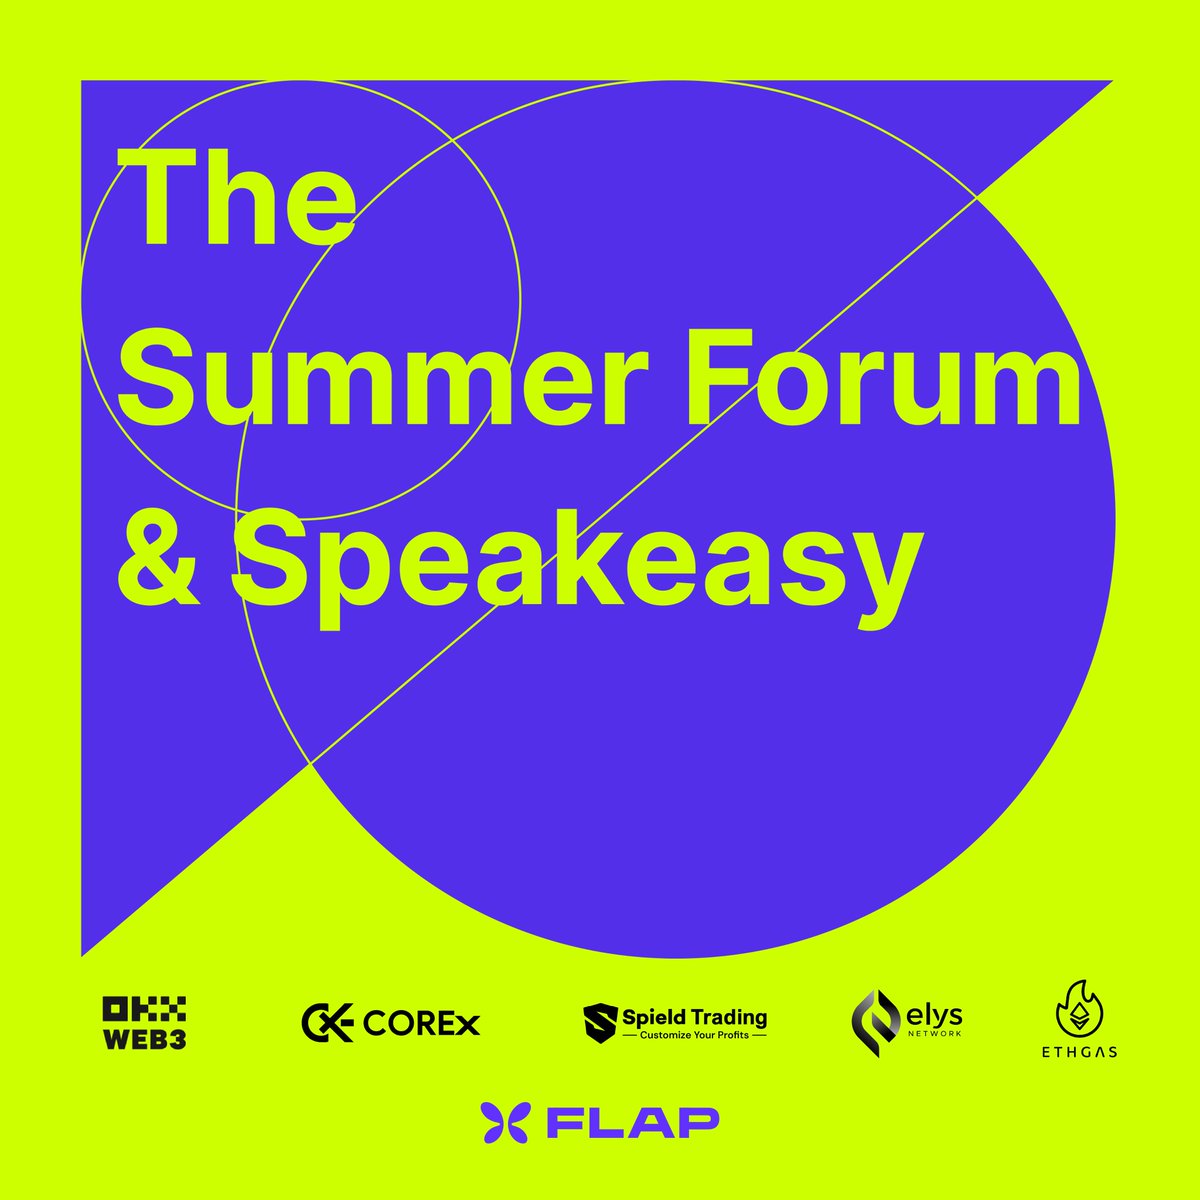 📢The Summer Forum & Speakeasy @consensus2024 Meet the @flapdotsh team and join us along with our friends @okxweb3 @COREx_Official @SpieldTrading @elys_network @ETHGASofficial for a flapping good time ;) Register: lu.ma/summerspeakeasy #Flip #Flap #Consensus2024 #Austin